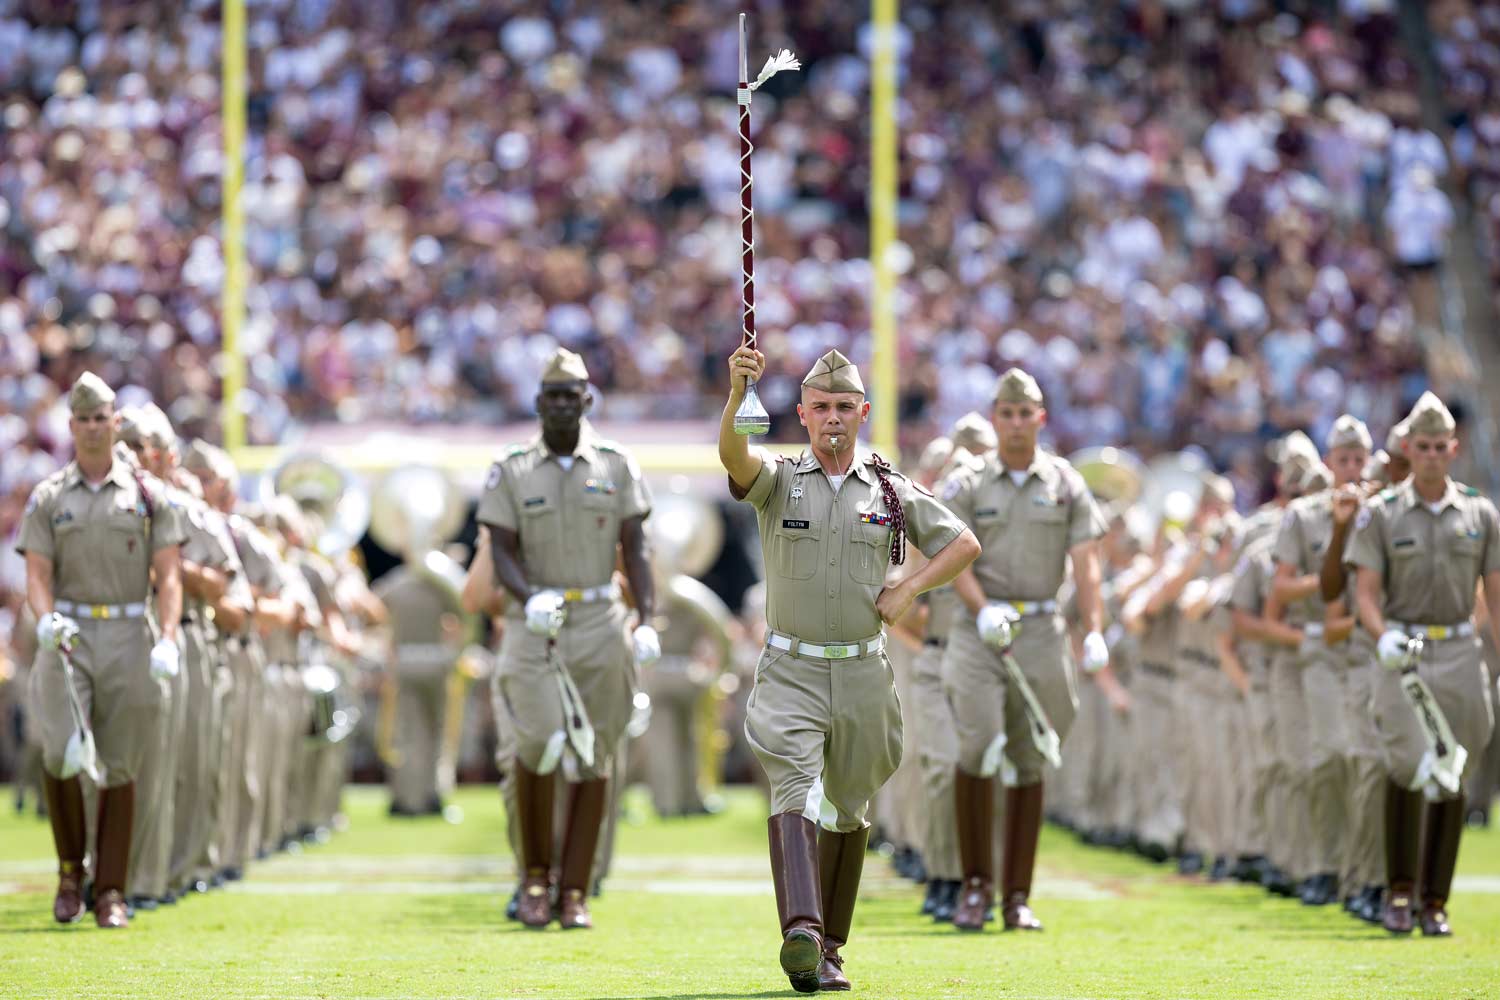 The Fightin' Texas Aggie Band drum major leading the band on Kyle Field